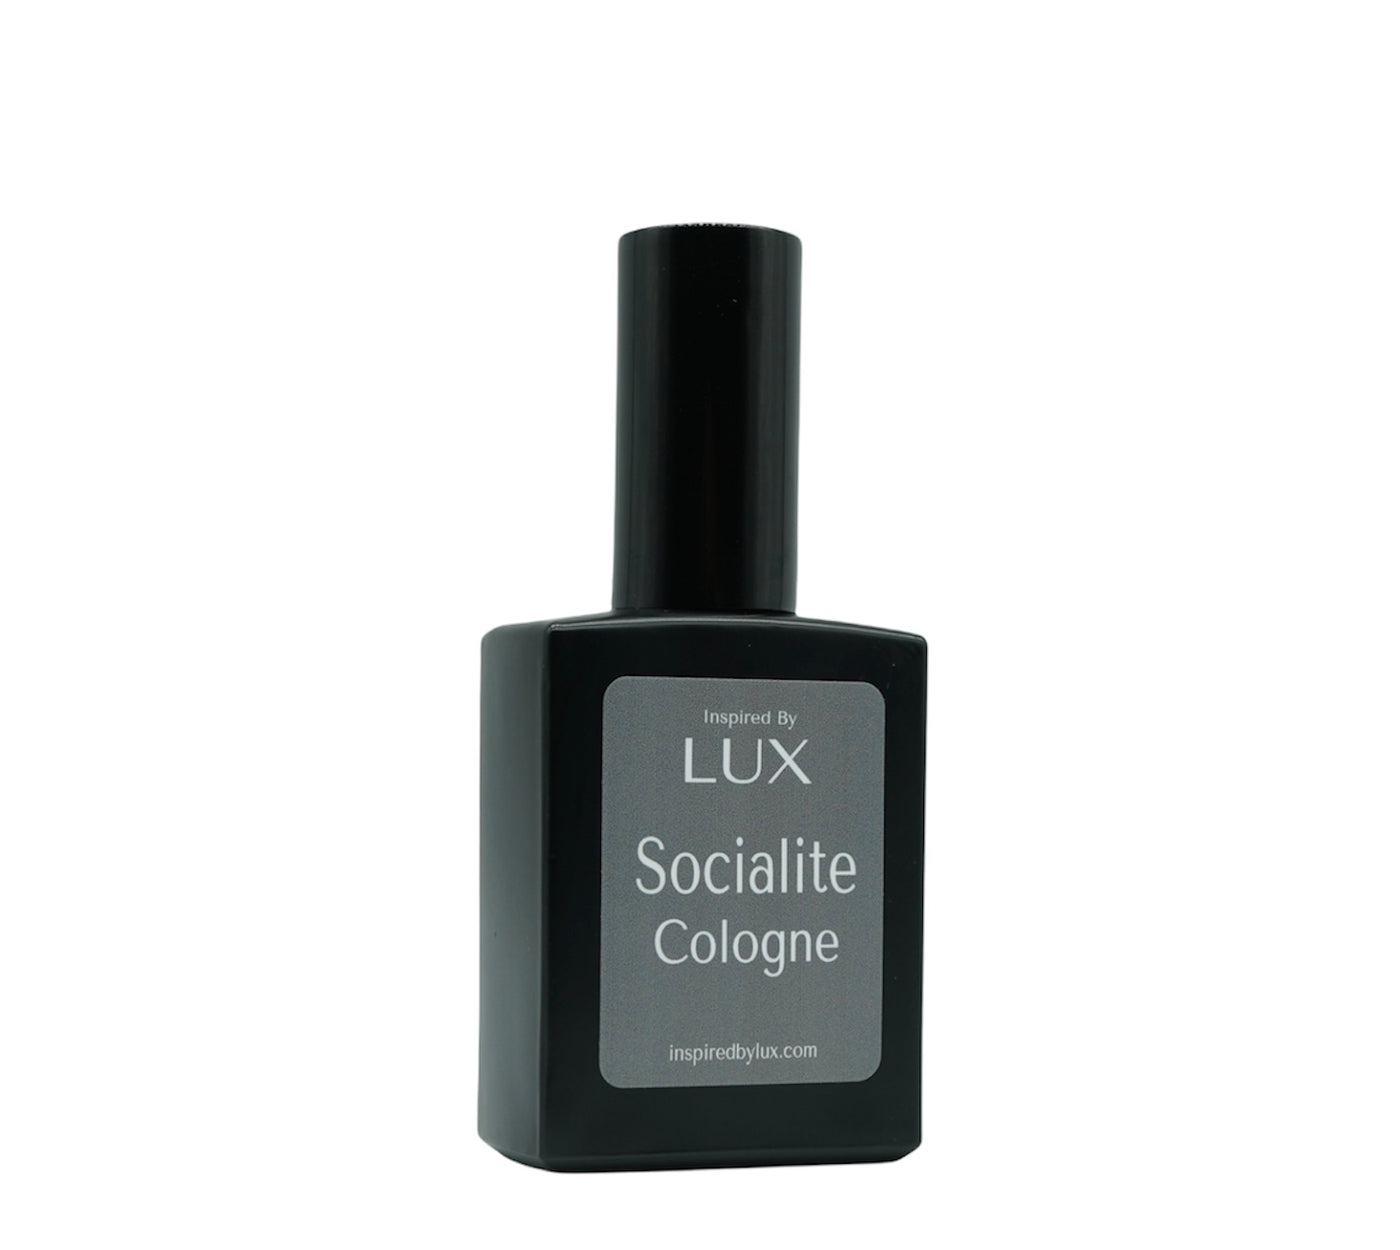 inspired by lux socialite cologne creed